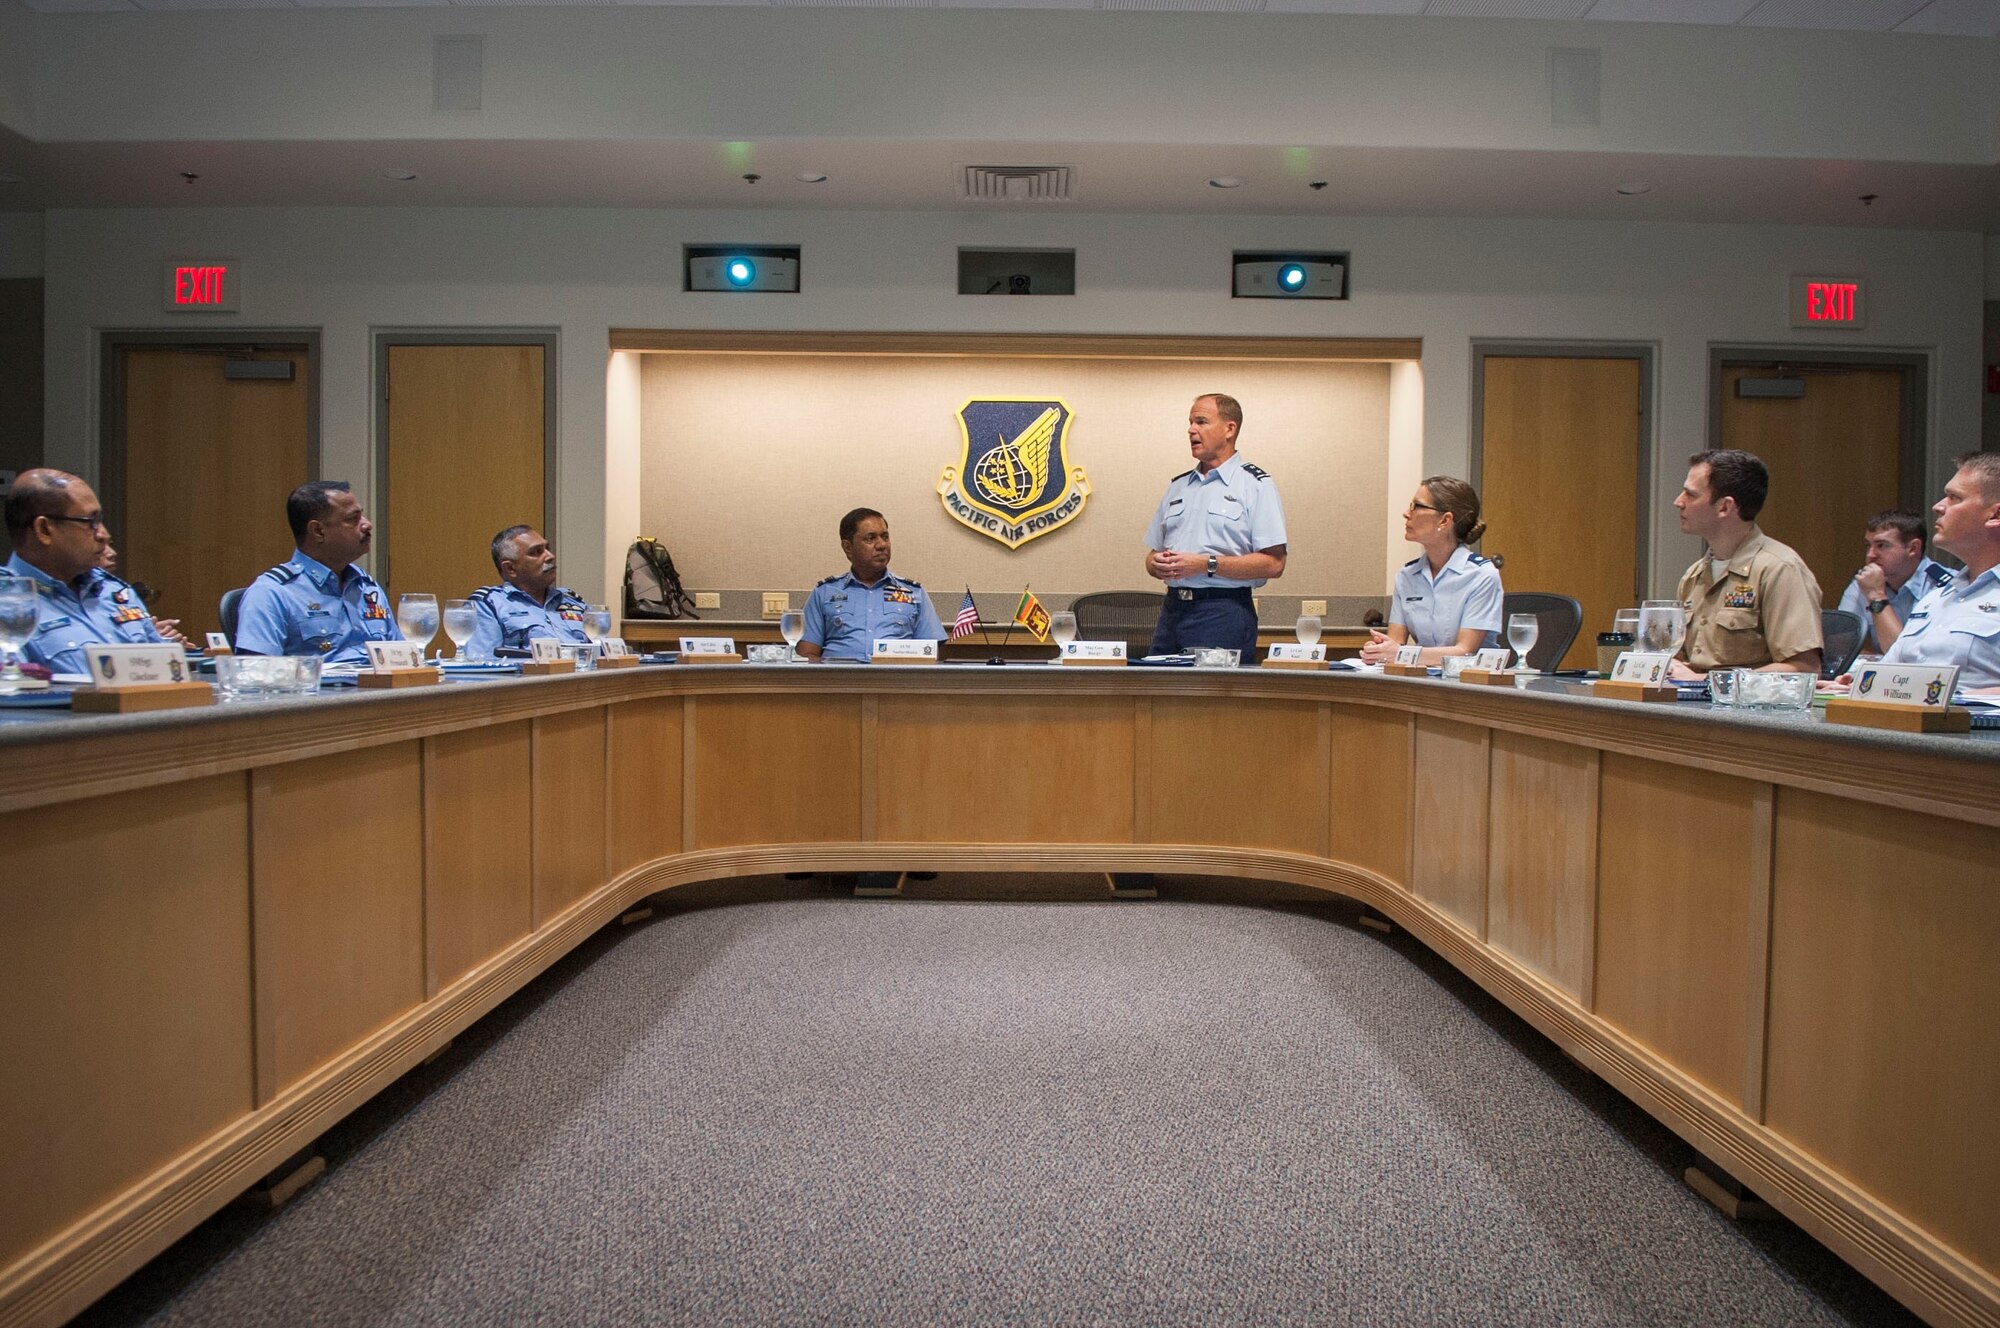 Maj. Gen. David Burgy, Air National Guard assistant to the Pacific Air Forces commander, provides opening remarks during the Airman-to-Airman talks at Joint Base Pearl Harbor-Hickam, Hawaii, Aug. 20, 2019. A2A talks are jointly held discussions between United States and partner nation air forces designed to bolster relations and provide an opportunity to share best practices from a variety of subject matter areas. (U.S. Air Force photo by Staff Sgt. Mikaley Kline)